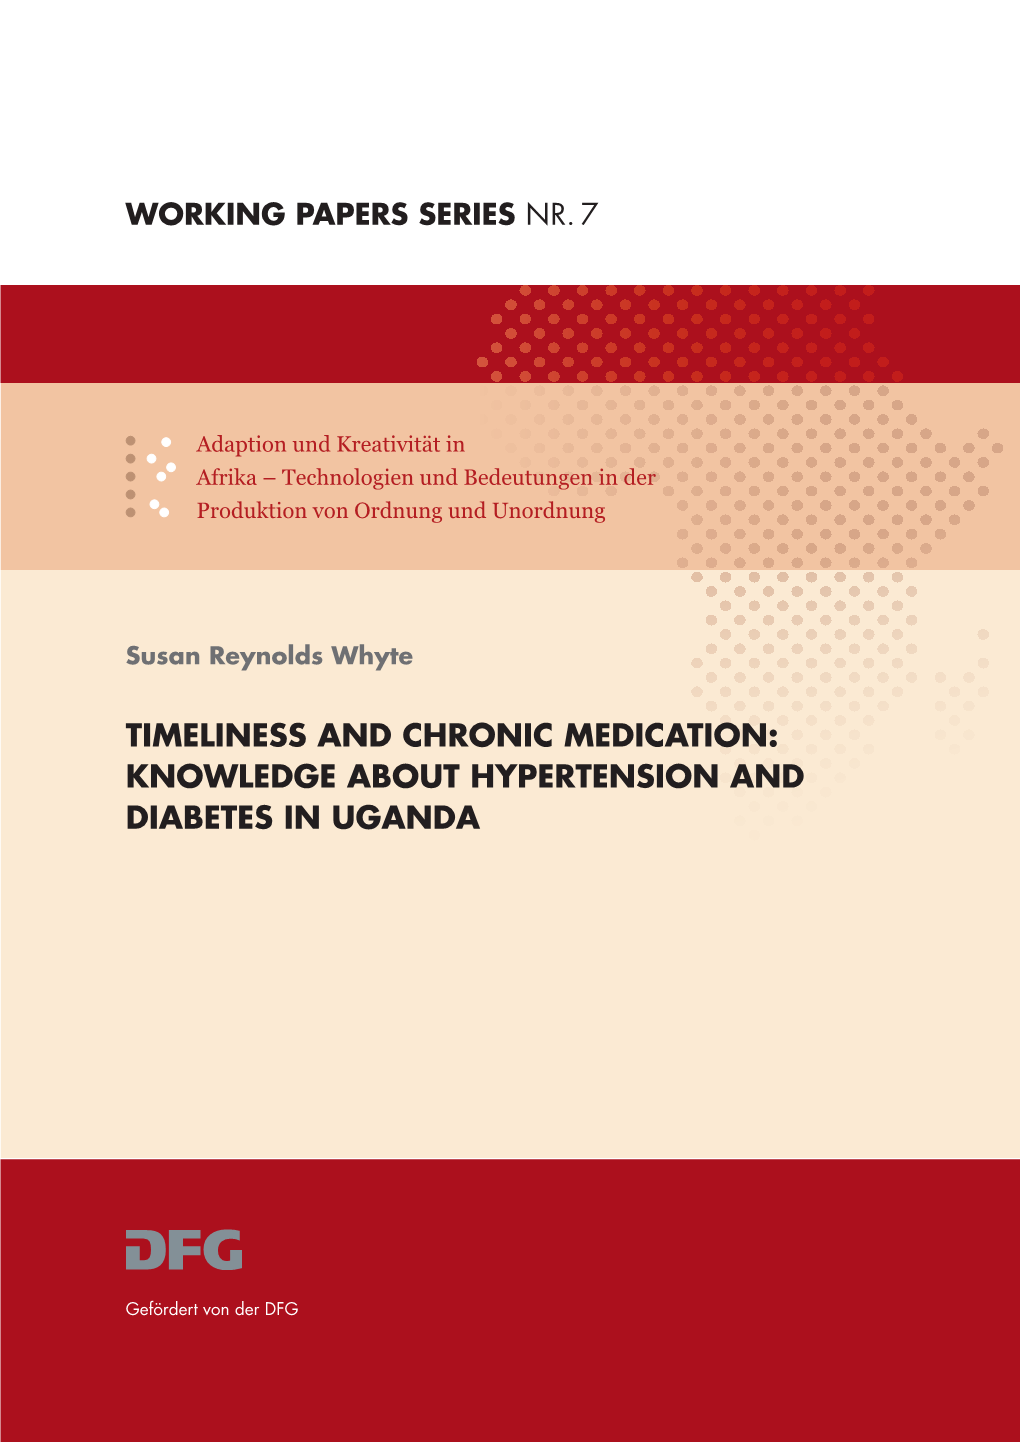 Timeliness and Chronic Medication: Knowledge About Hypertension and Diabetes in Uganda